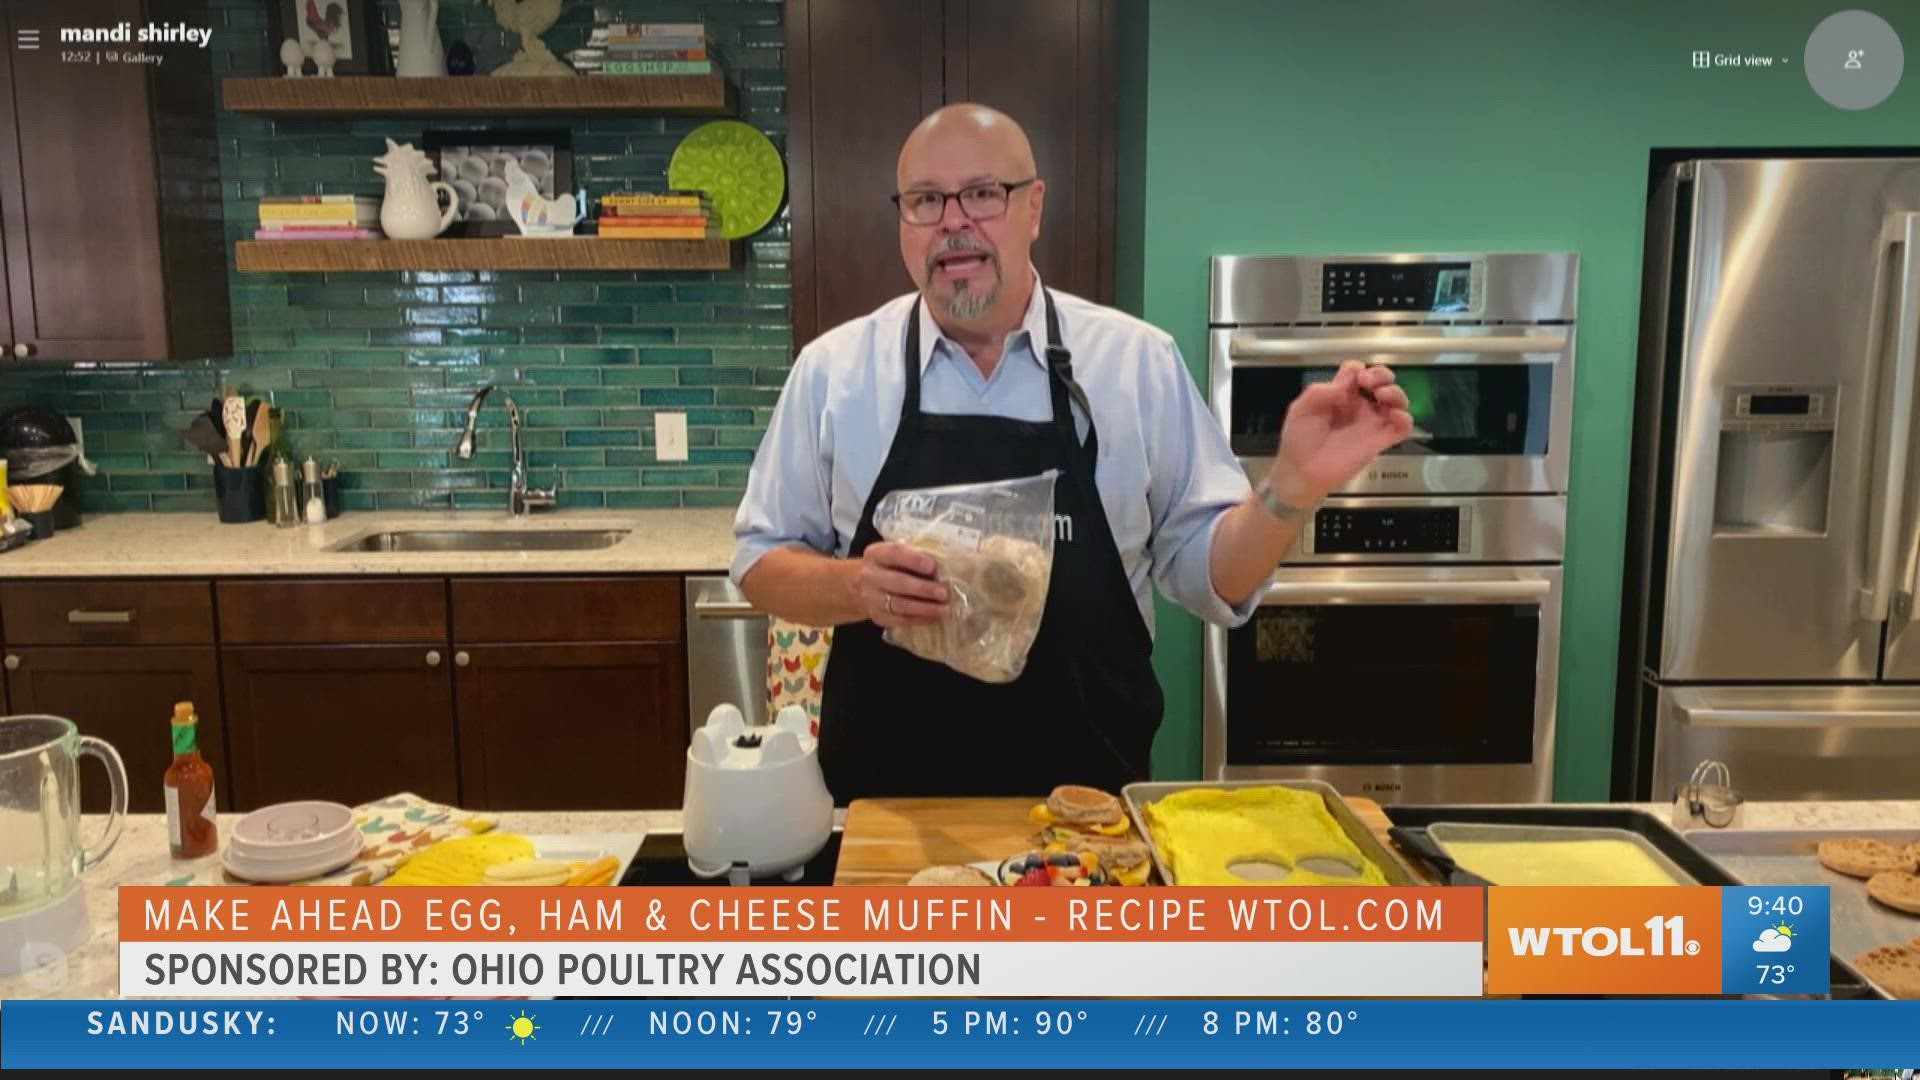 The Ohio Poultry Association is here to talk about eggs and the Best Buckeye Breakfast.